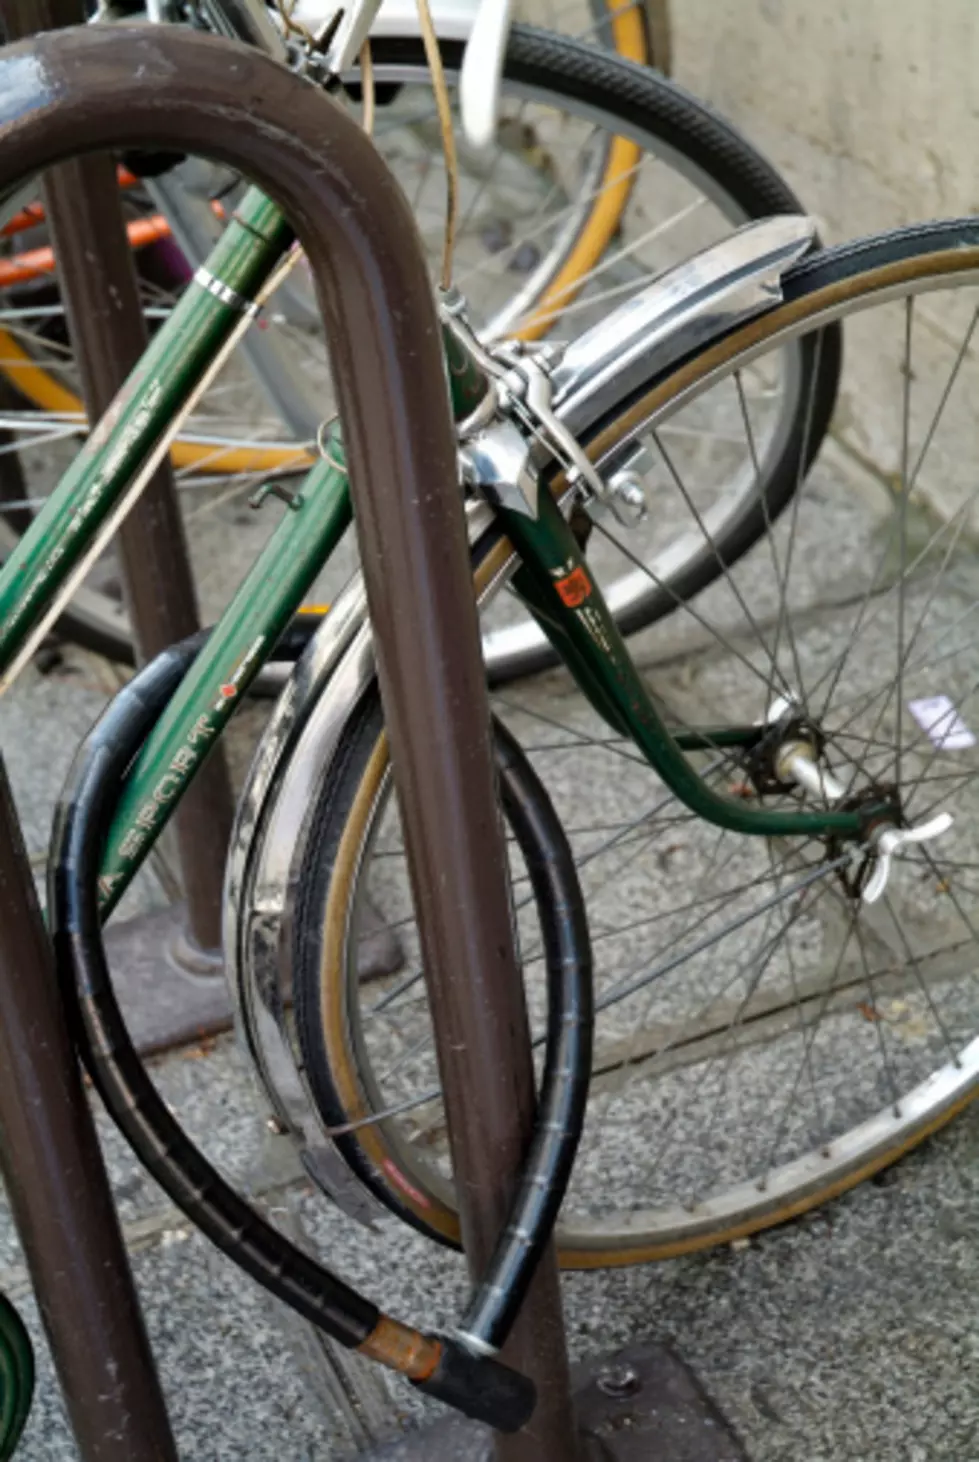 Public Information Officer Says Bike Theft is “Crime of Opportunity”